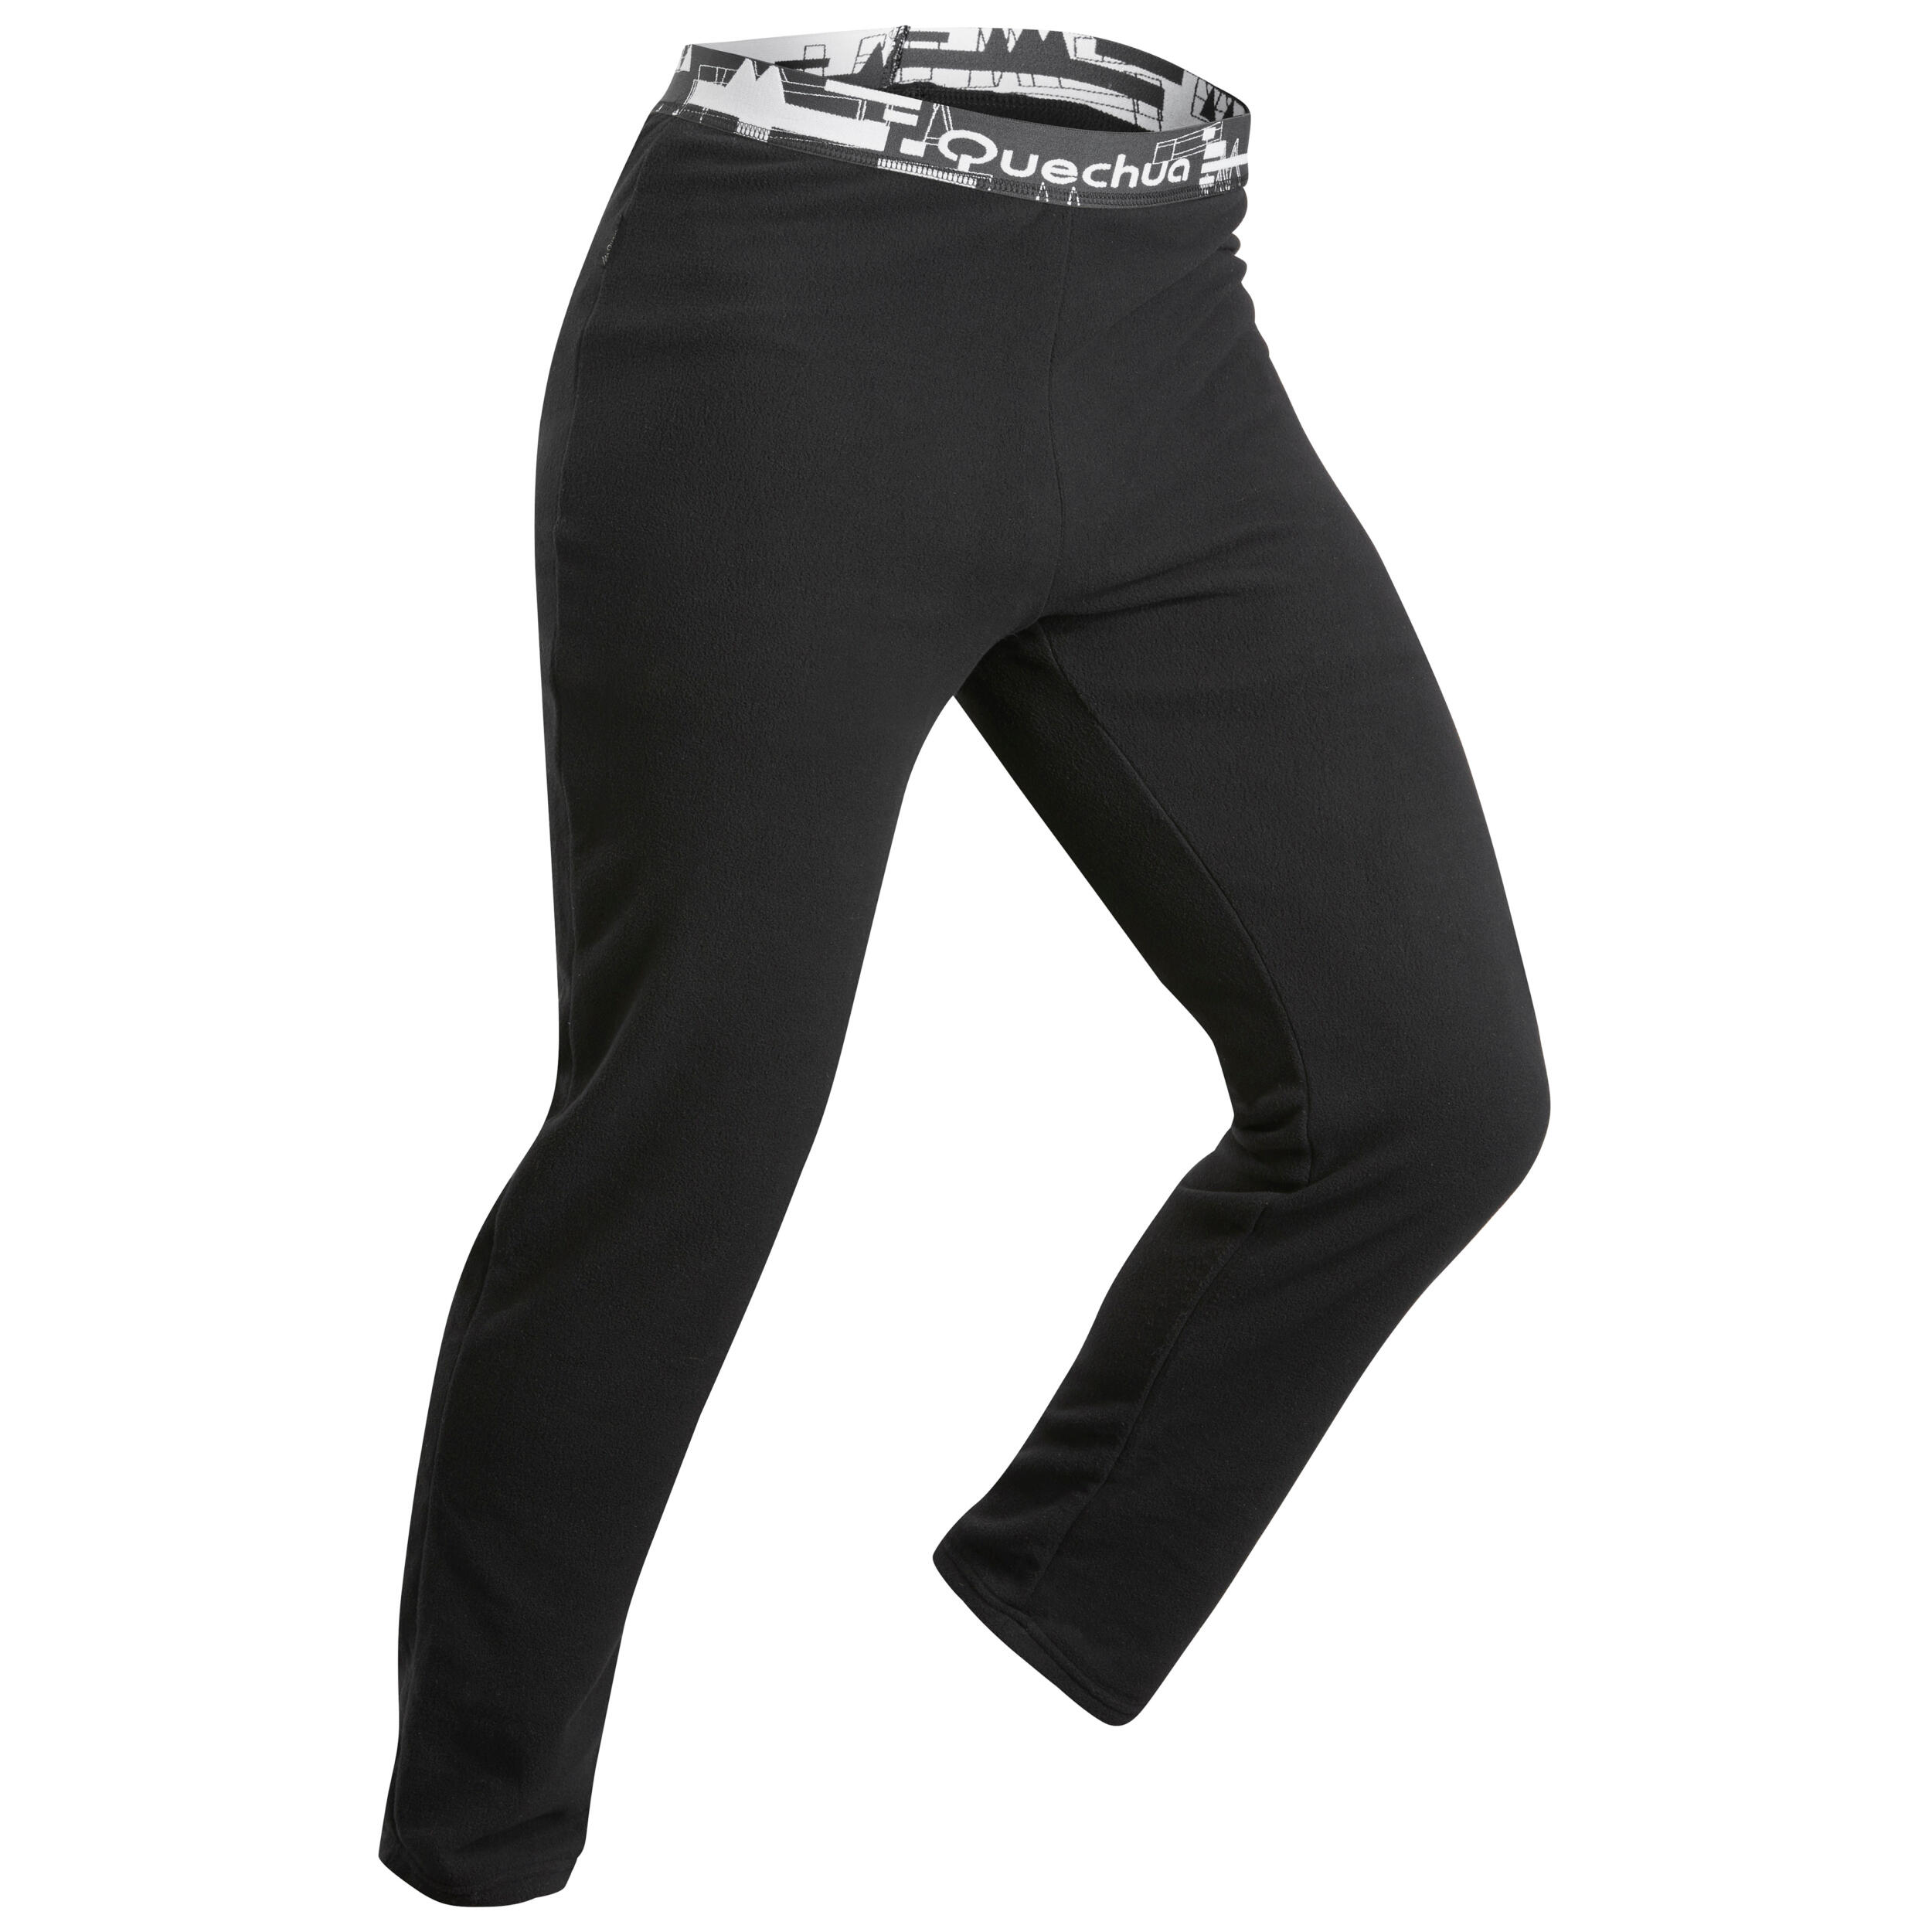 Buy Cotton decathalon Track Combo Pants (Set of 2) Size M Black at Amazon.in